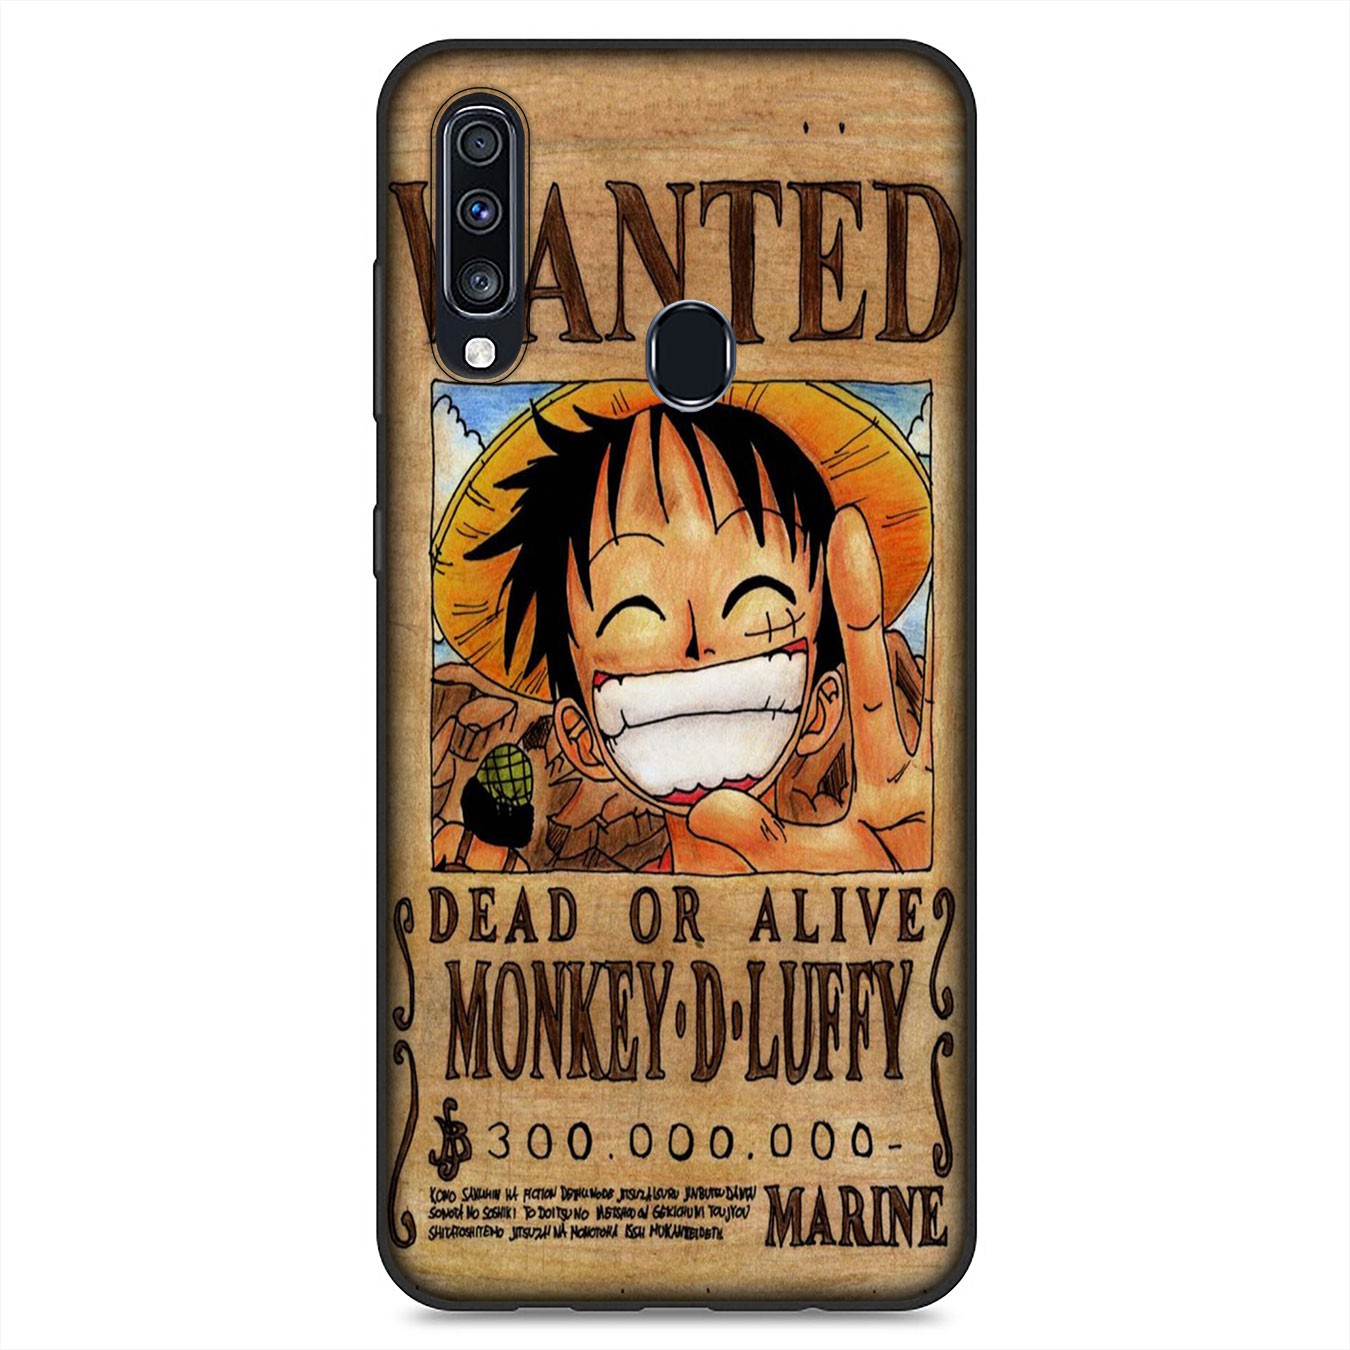 Samsung Galaxy A02S J2 J4 J5 J6 Plus J7 Prime A02 M02 j6+ A42 + Casing Soft Silicone Phone Case luffy Anime One Piece Cover